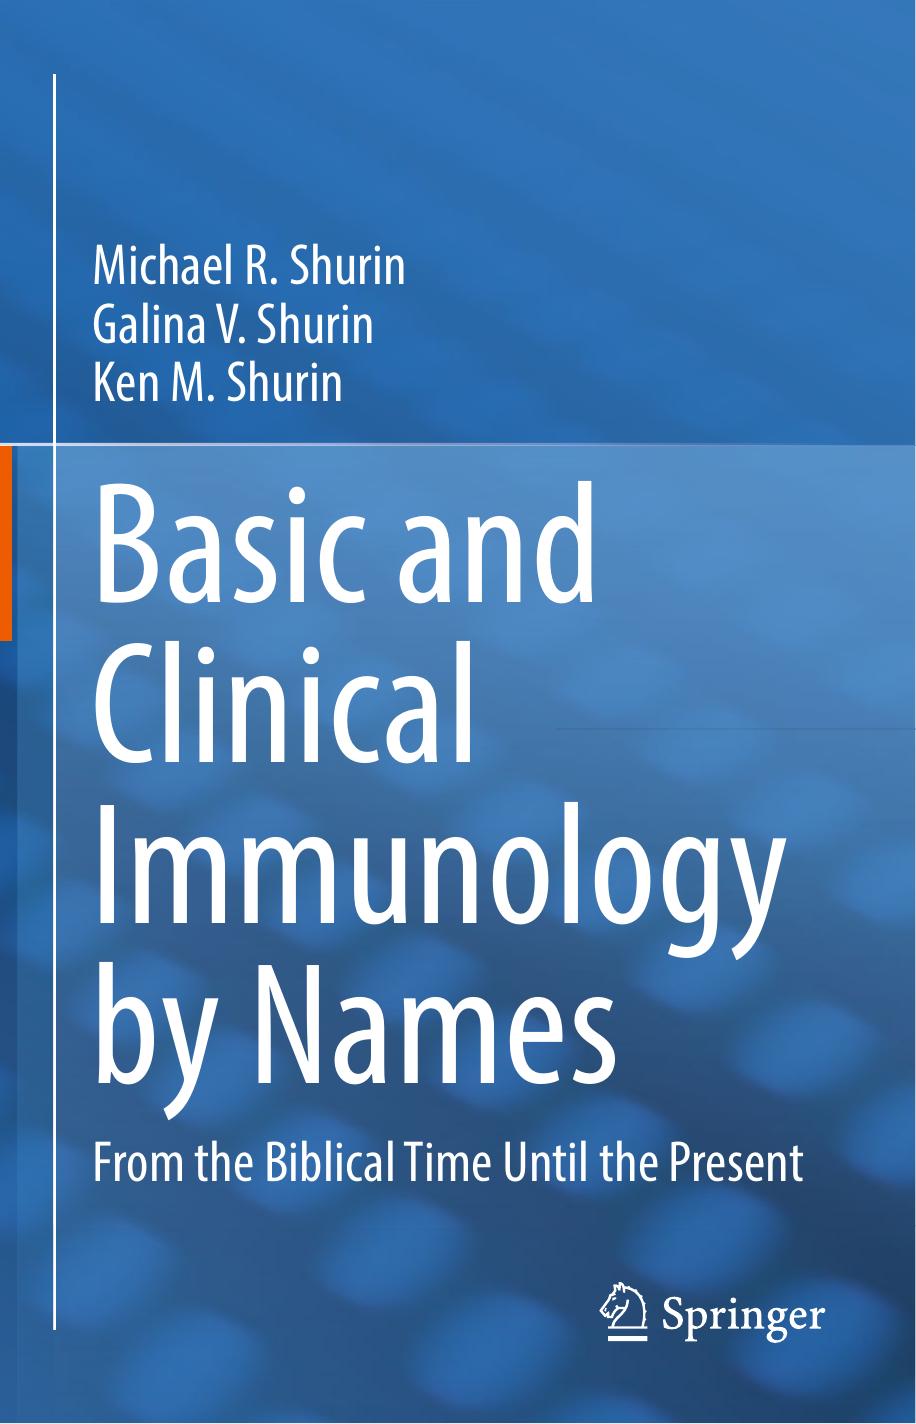 Basic and Clinical Immunology by Names